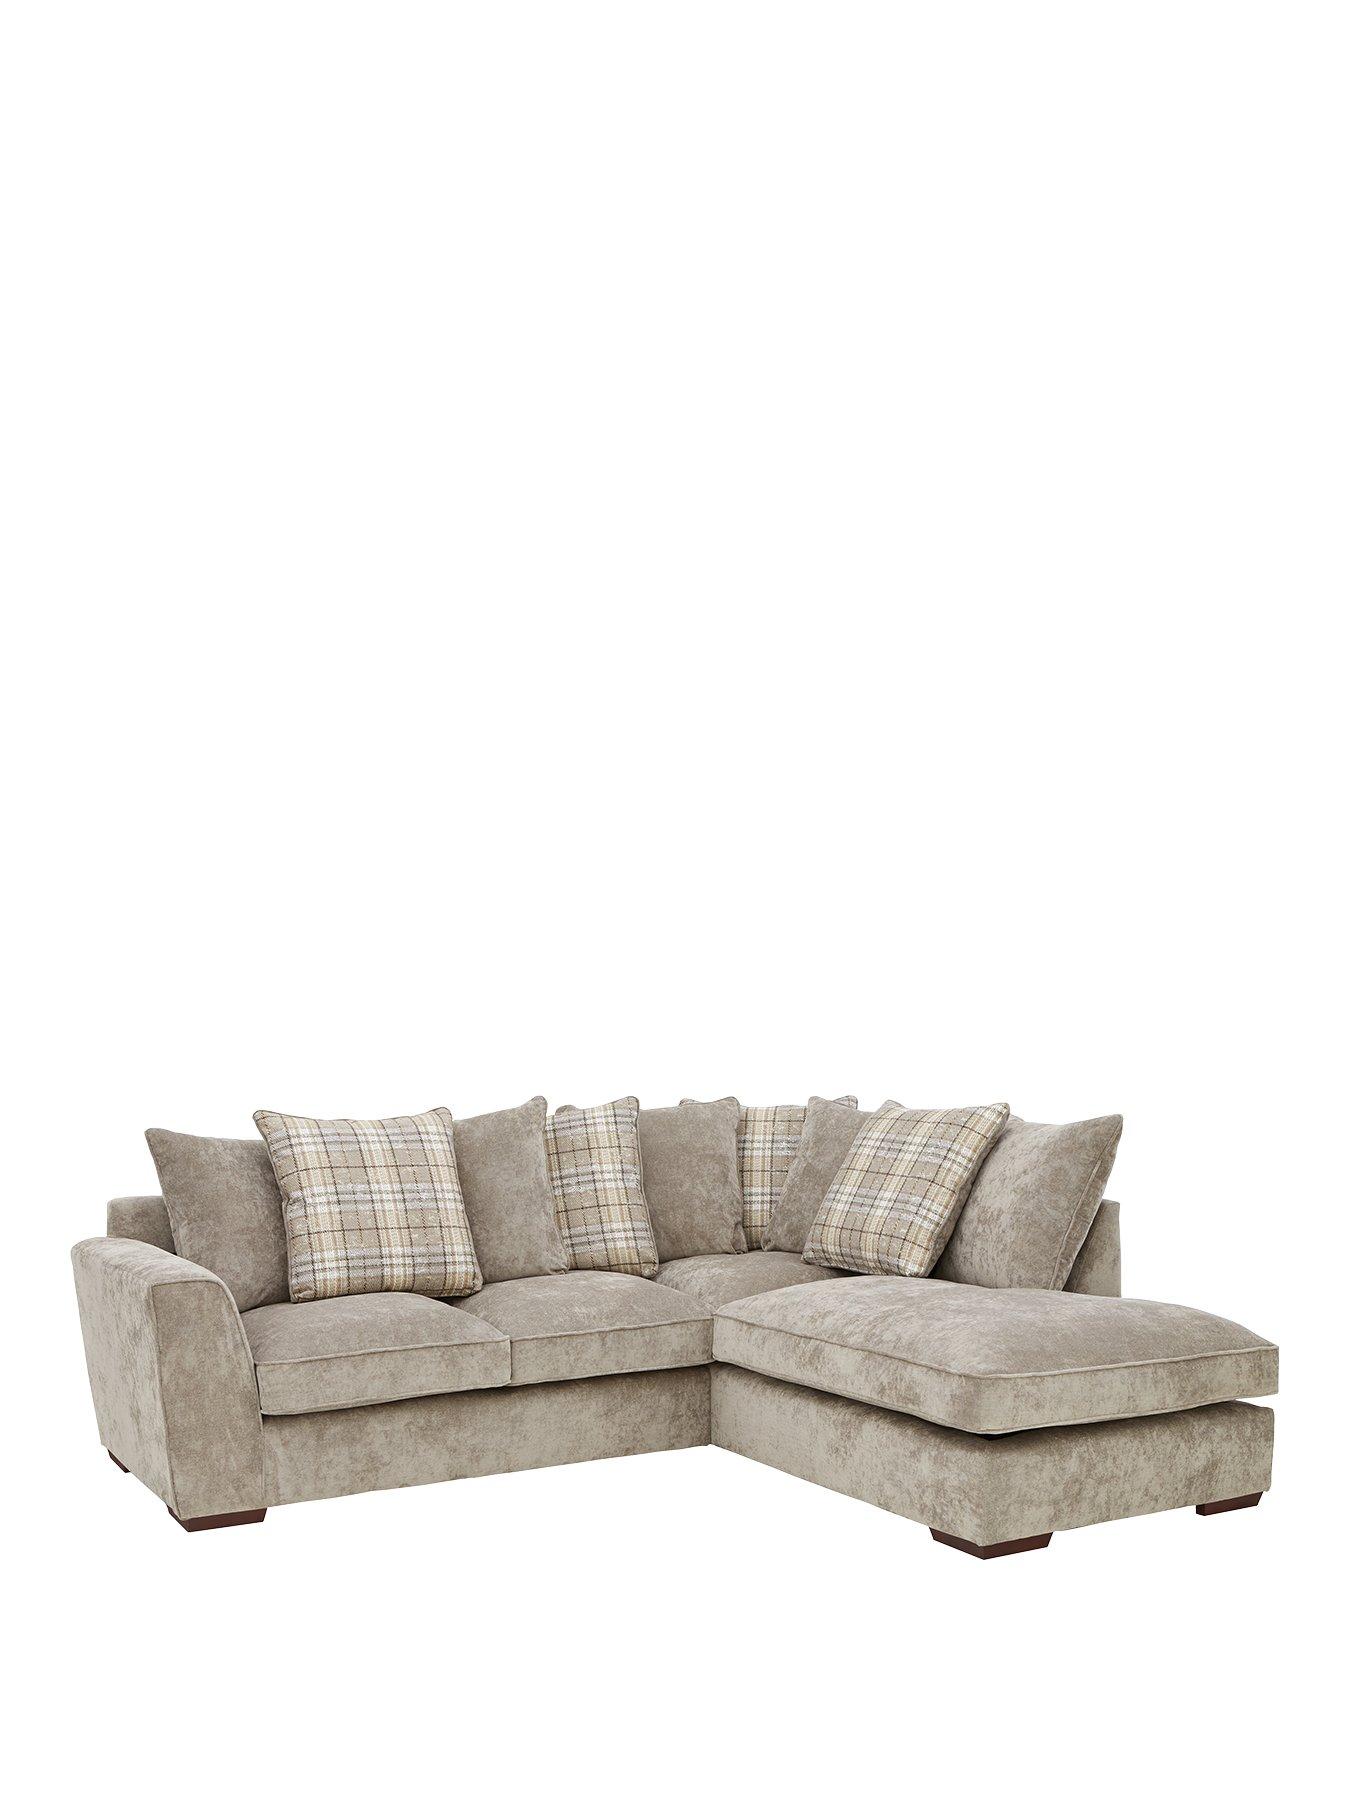 Campbell Fabric Right Hand Scatter Back Corner Group Sofa